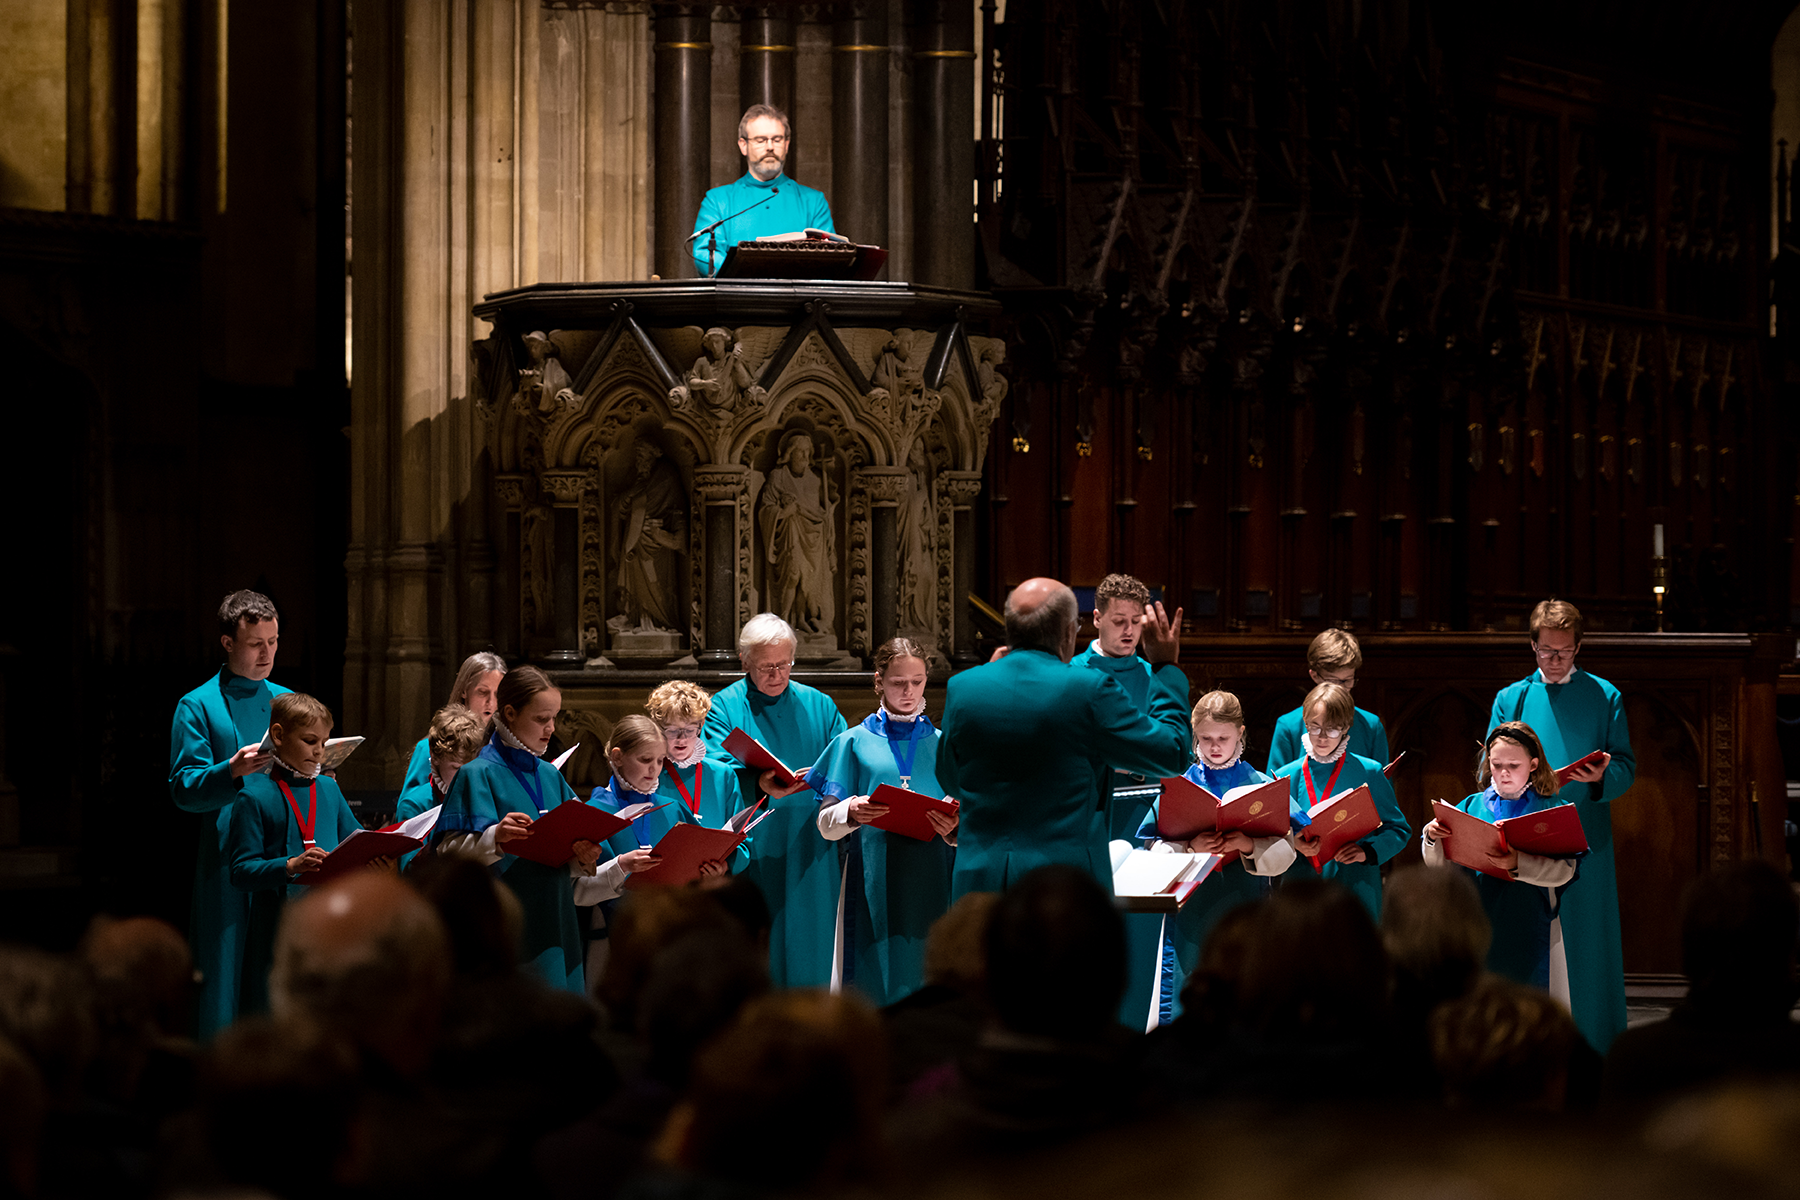 Salisbury Cathedral Choir in cassocks singing, being conducted by a man